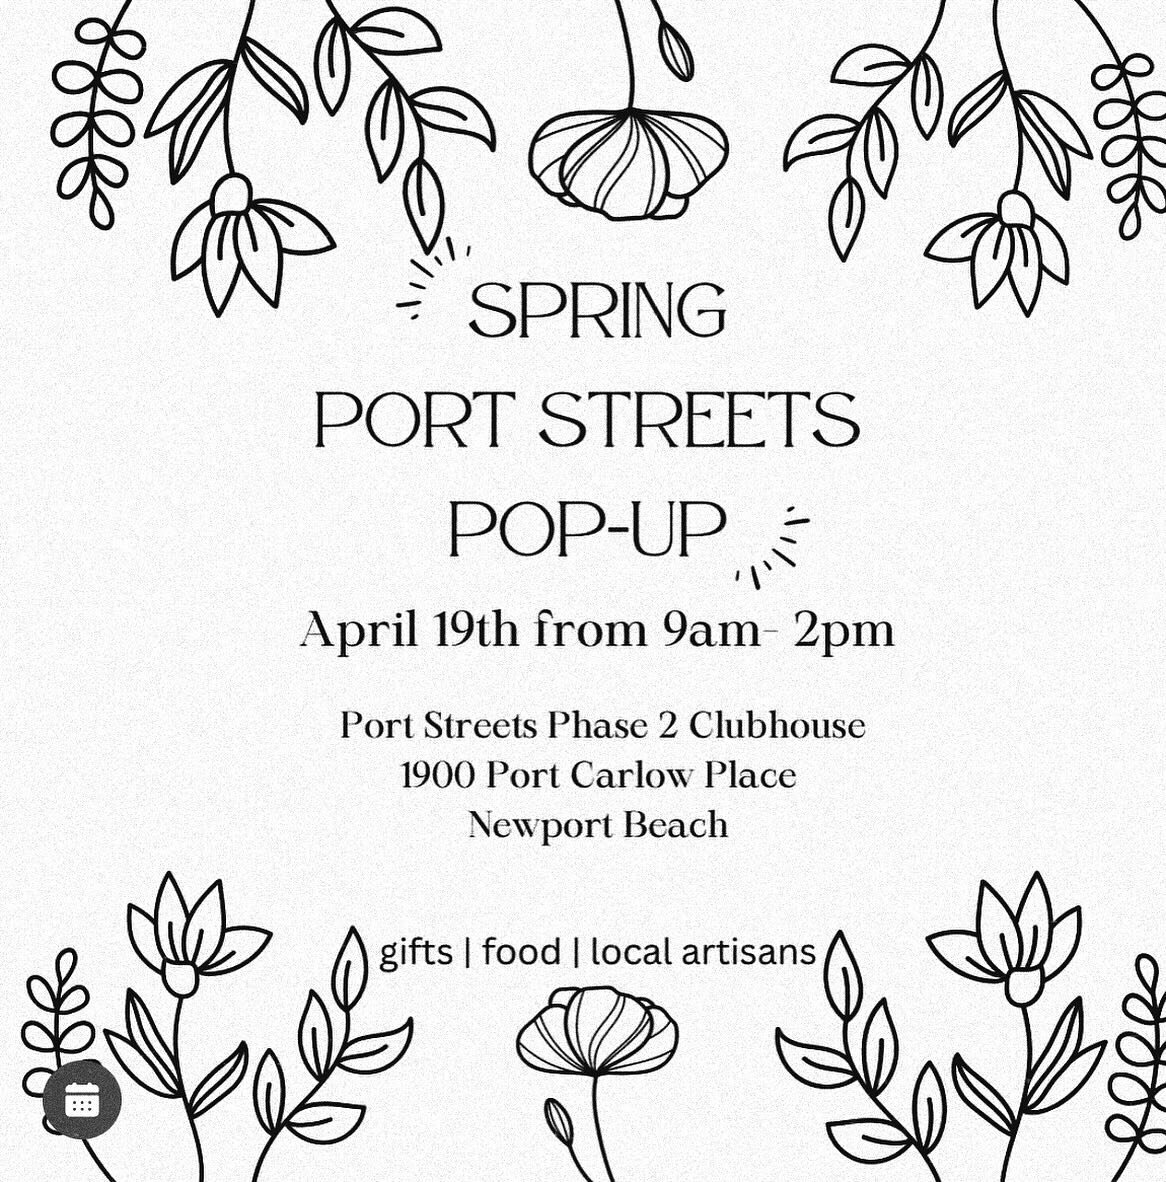 It&rsquo;s officially April, which means the @portstreetspopup is only 18 days away! 🛍️

We are thrilled to be the media sponsor again with gold sponsor @juliepierzak.realestate for this community driven event that supports small businesses not only